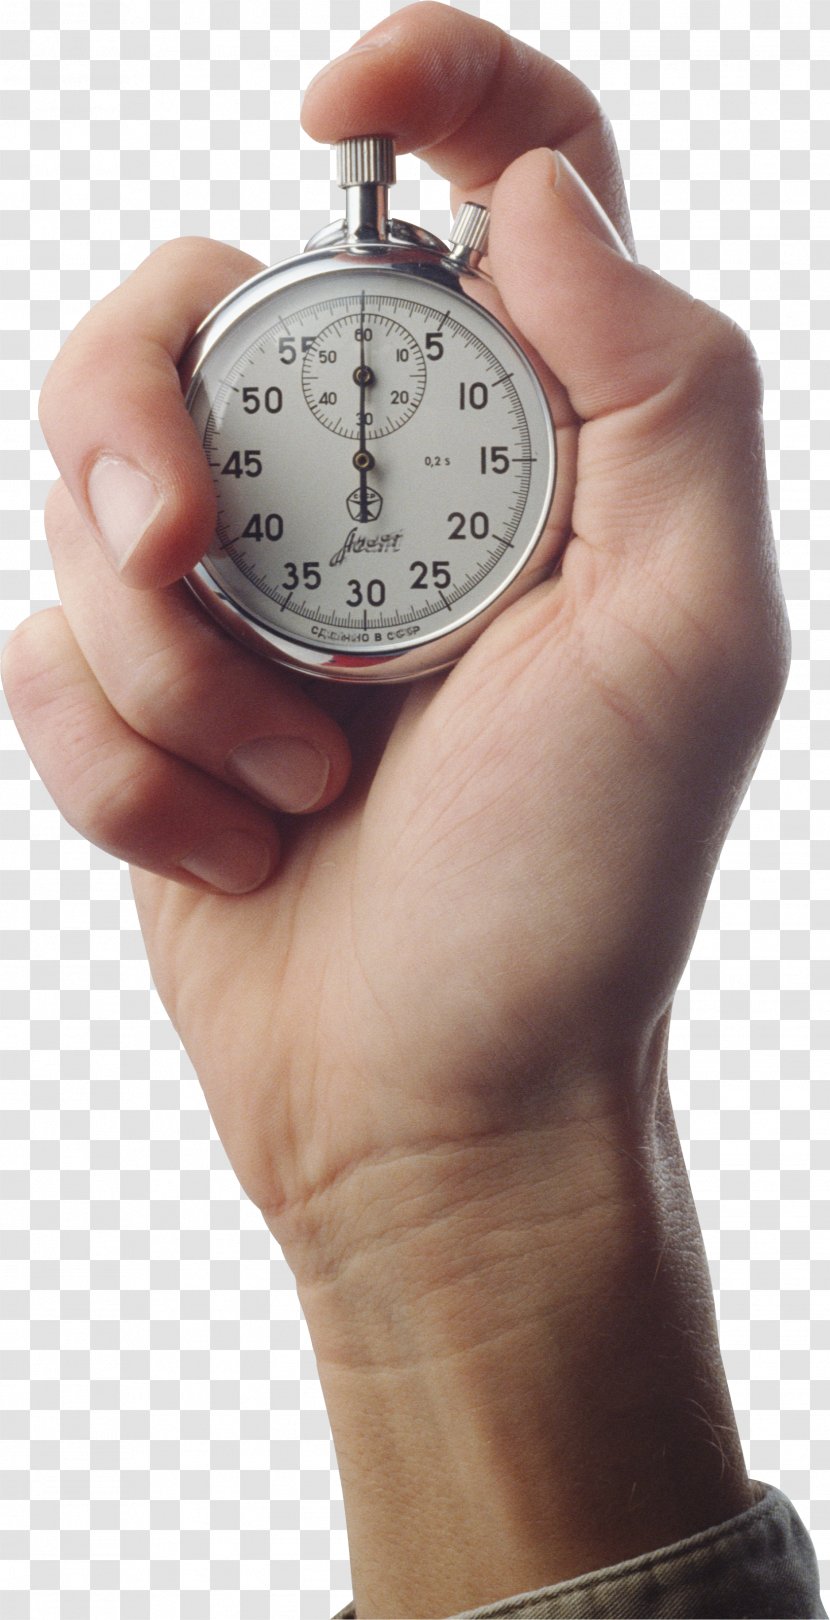 Stopwatch Image File Formats Clip Art - Watch Transparent PNG